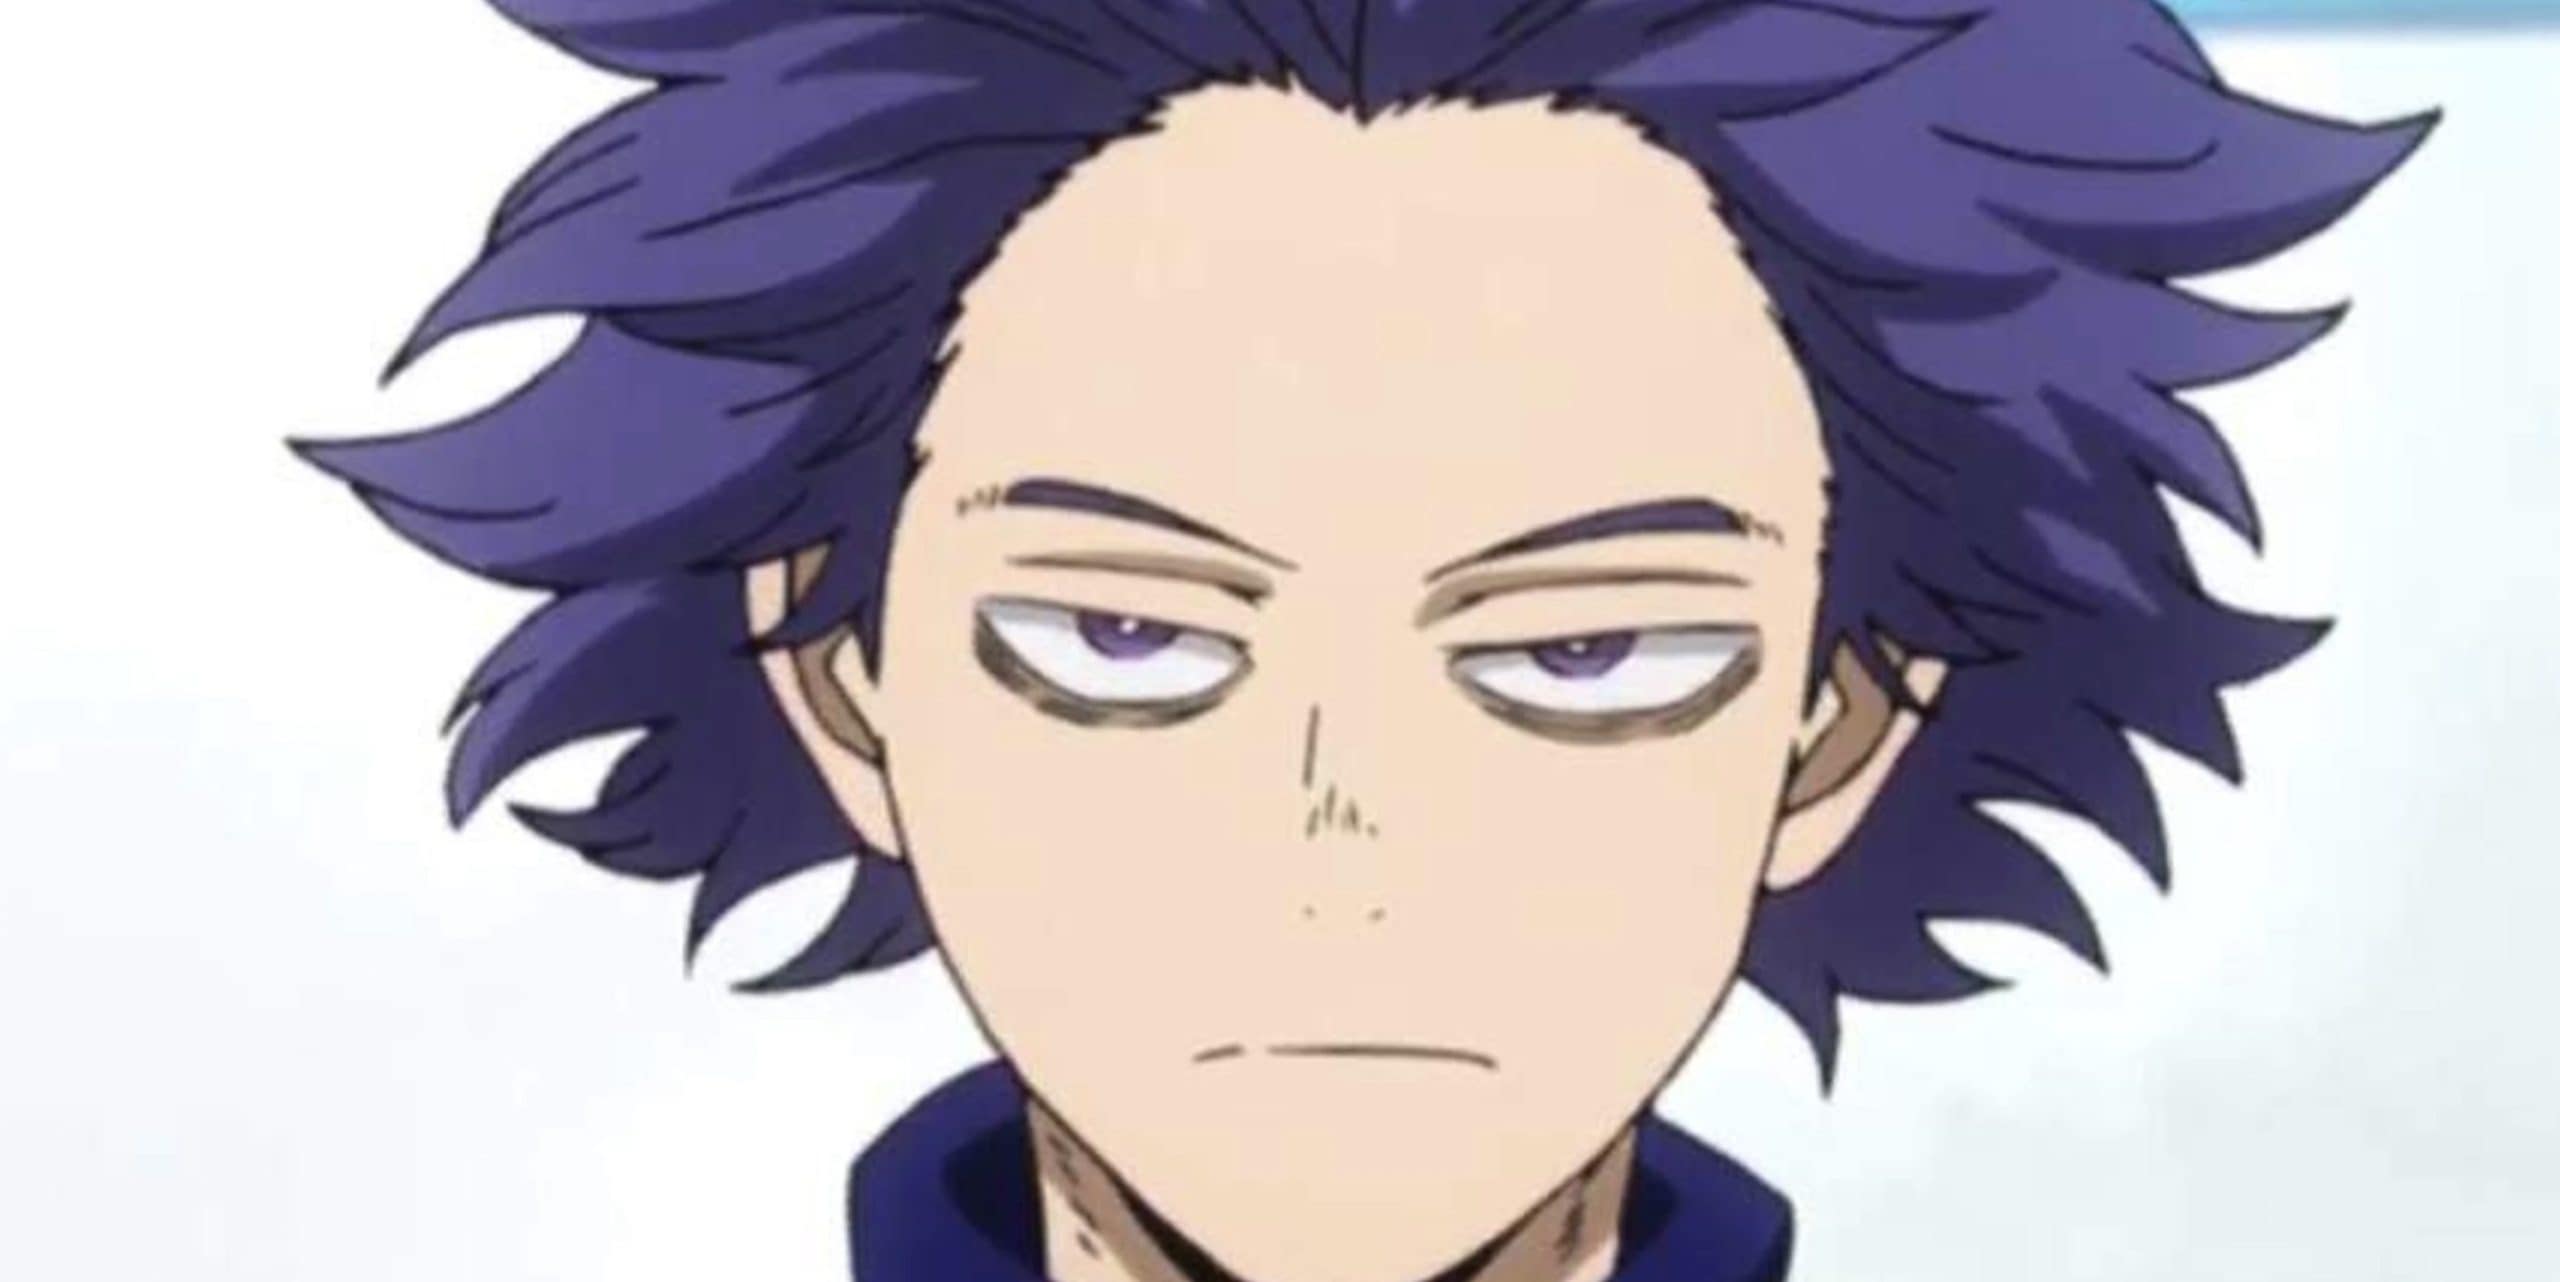 1706973397 153 The Real Why Hitoshi Shinso Is Such A Popular Character